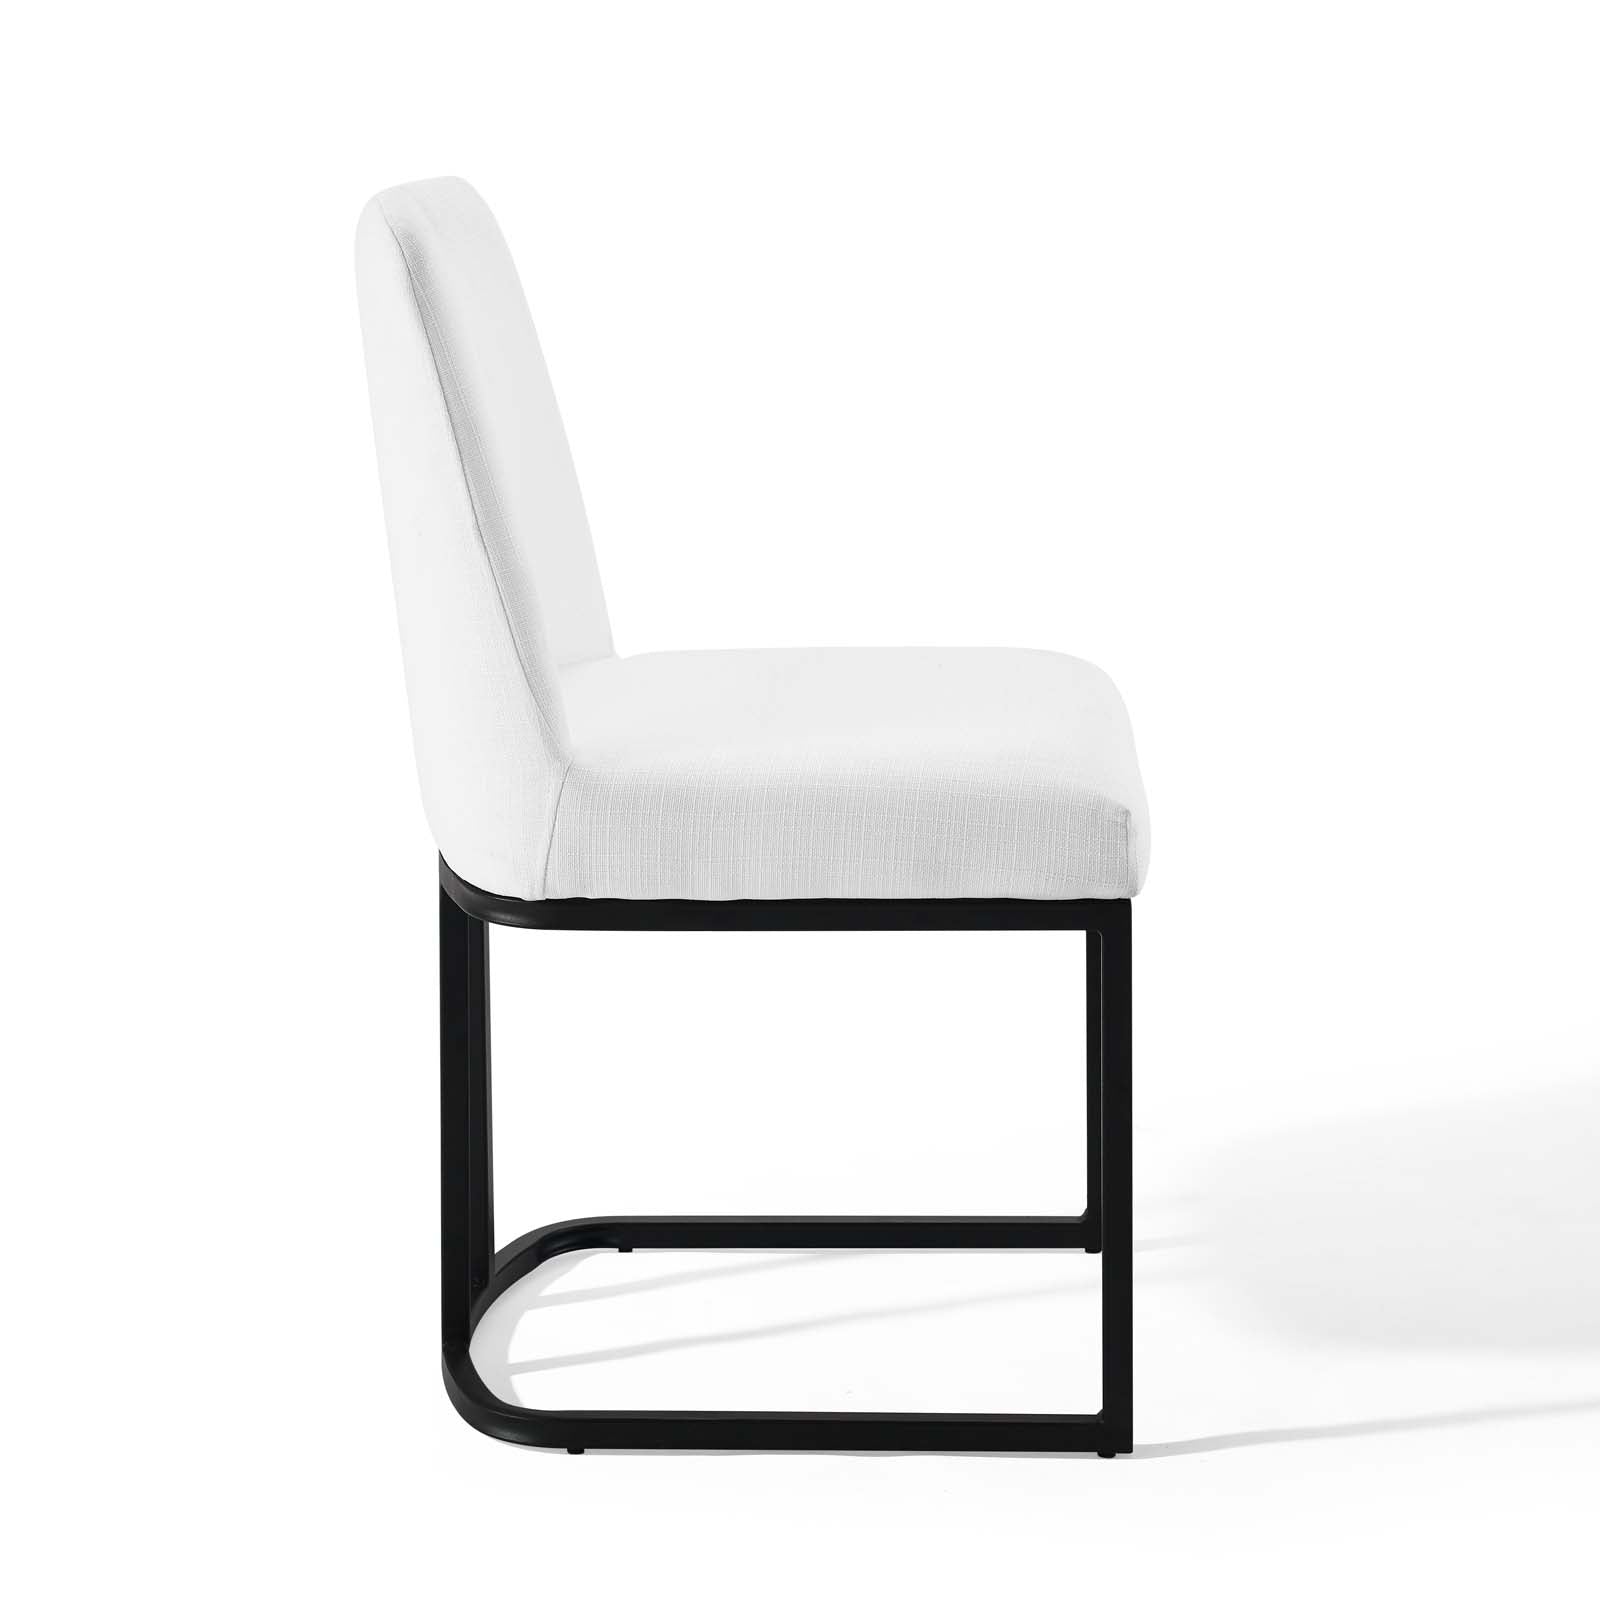 Modway Dining Chairs - Amplify Sled Base Upholstered Fabric Dining Chairs - ( Set of 2 ) Black White